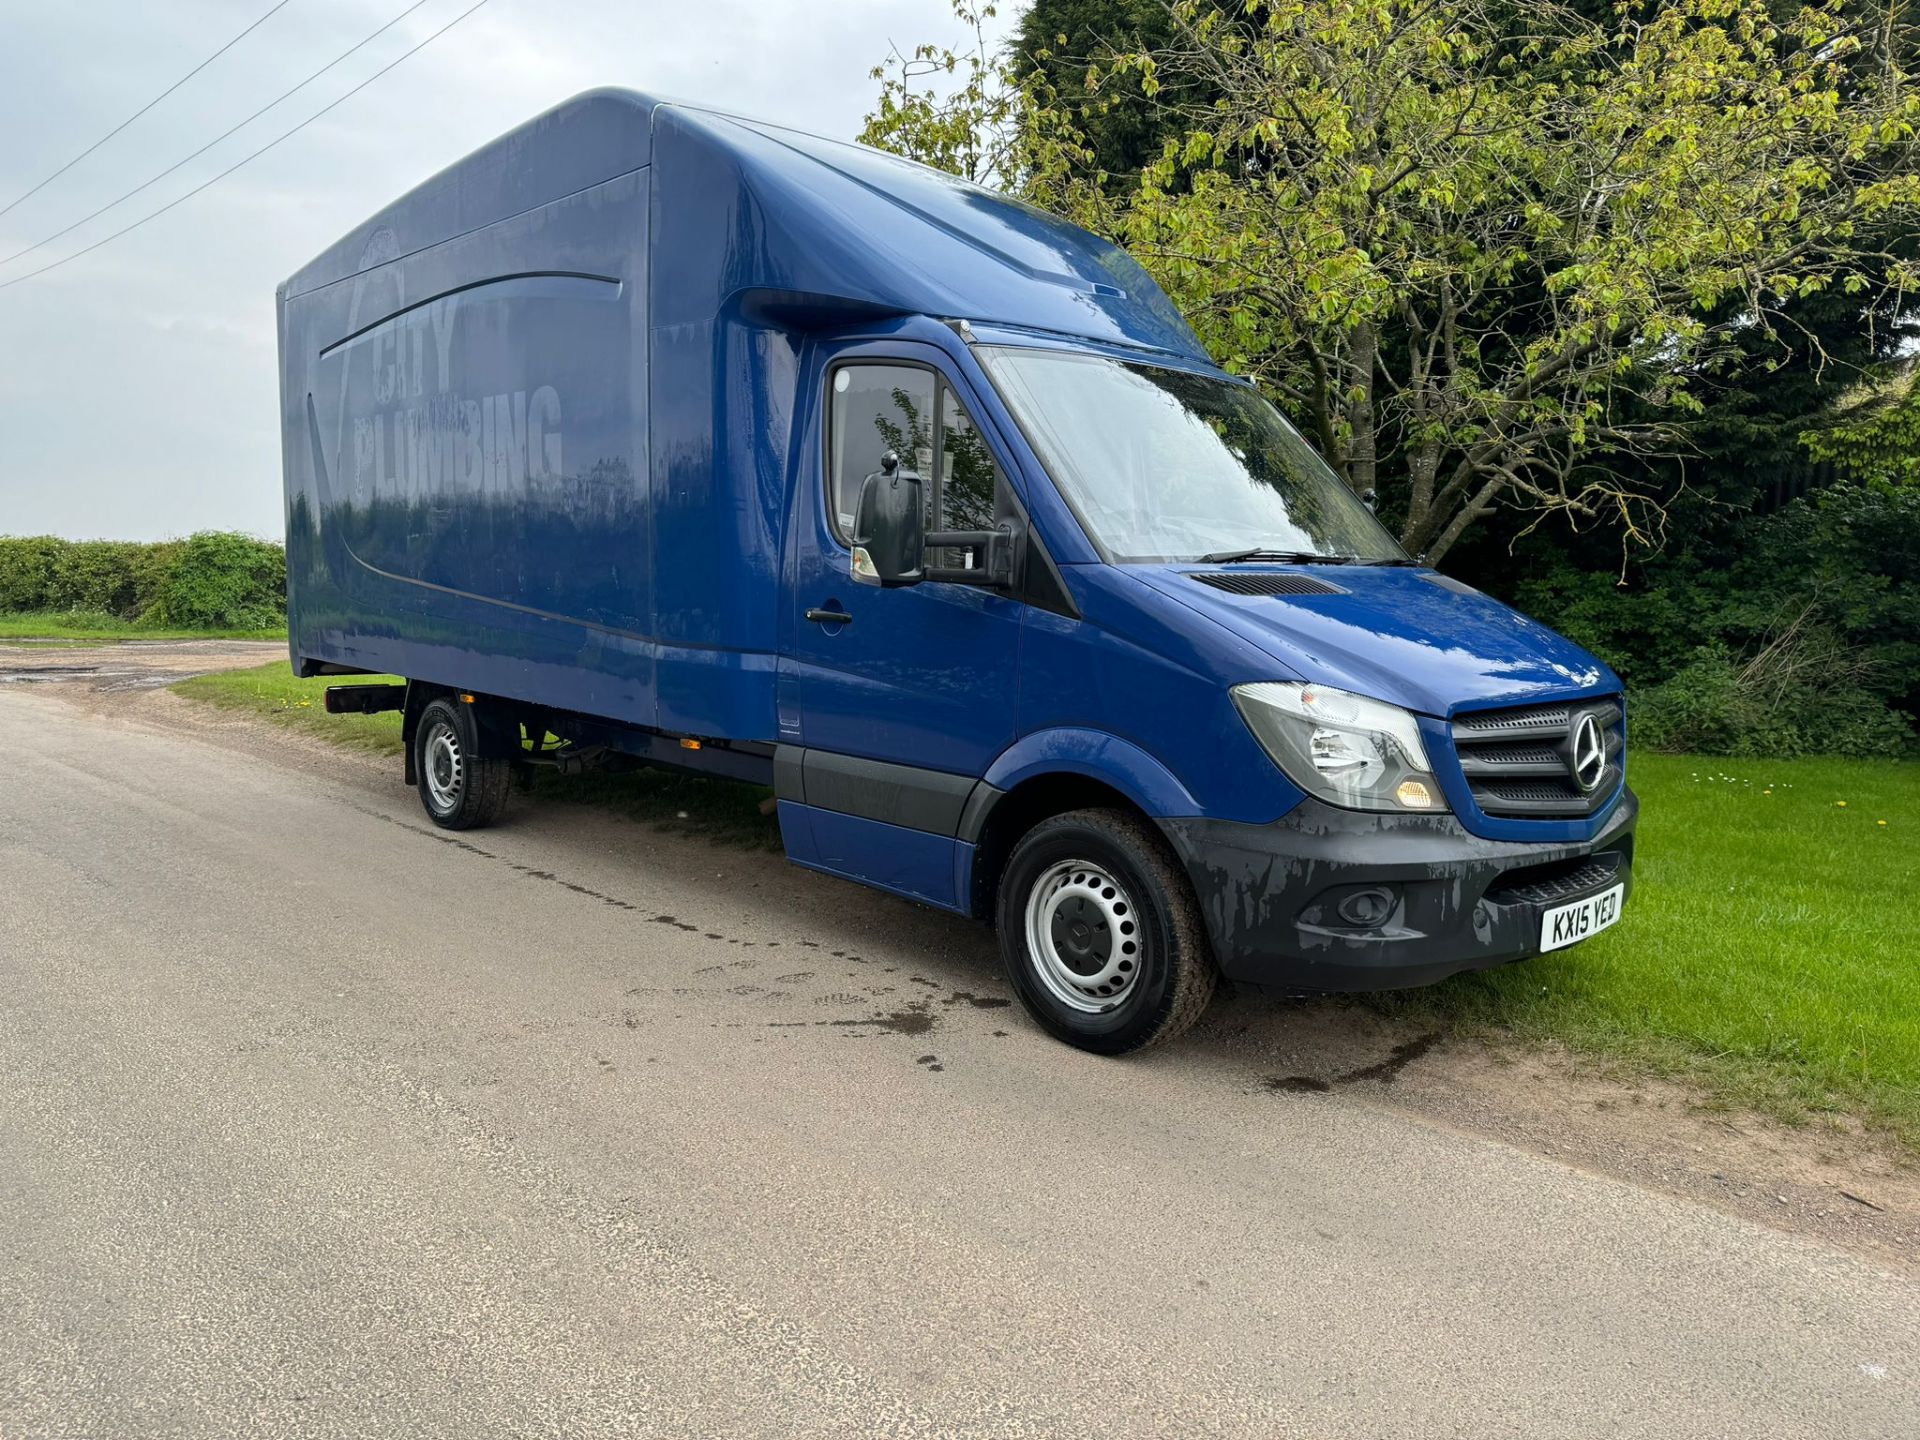 2015 MERCEDES-BENZ SPRINTER 313 CDI BLUE CHASSIS CAB BOX VAN WITH TAIL LIFT *NO VAT*